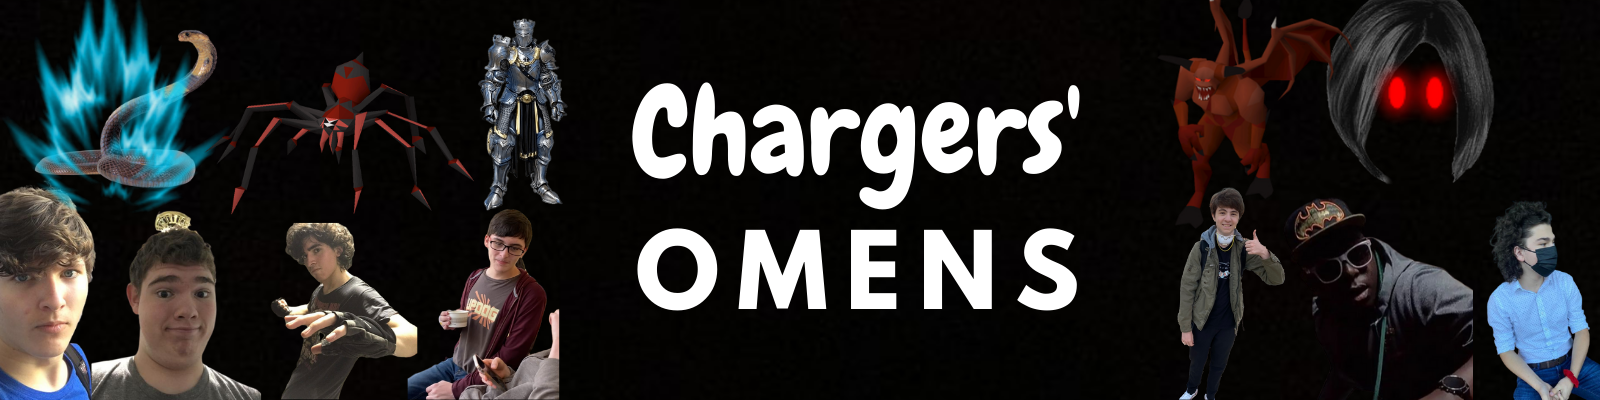 Chargers' Omens: Time Twisted